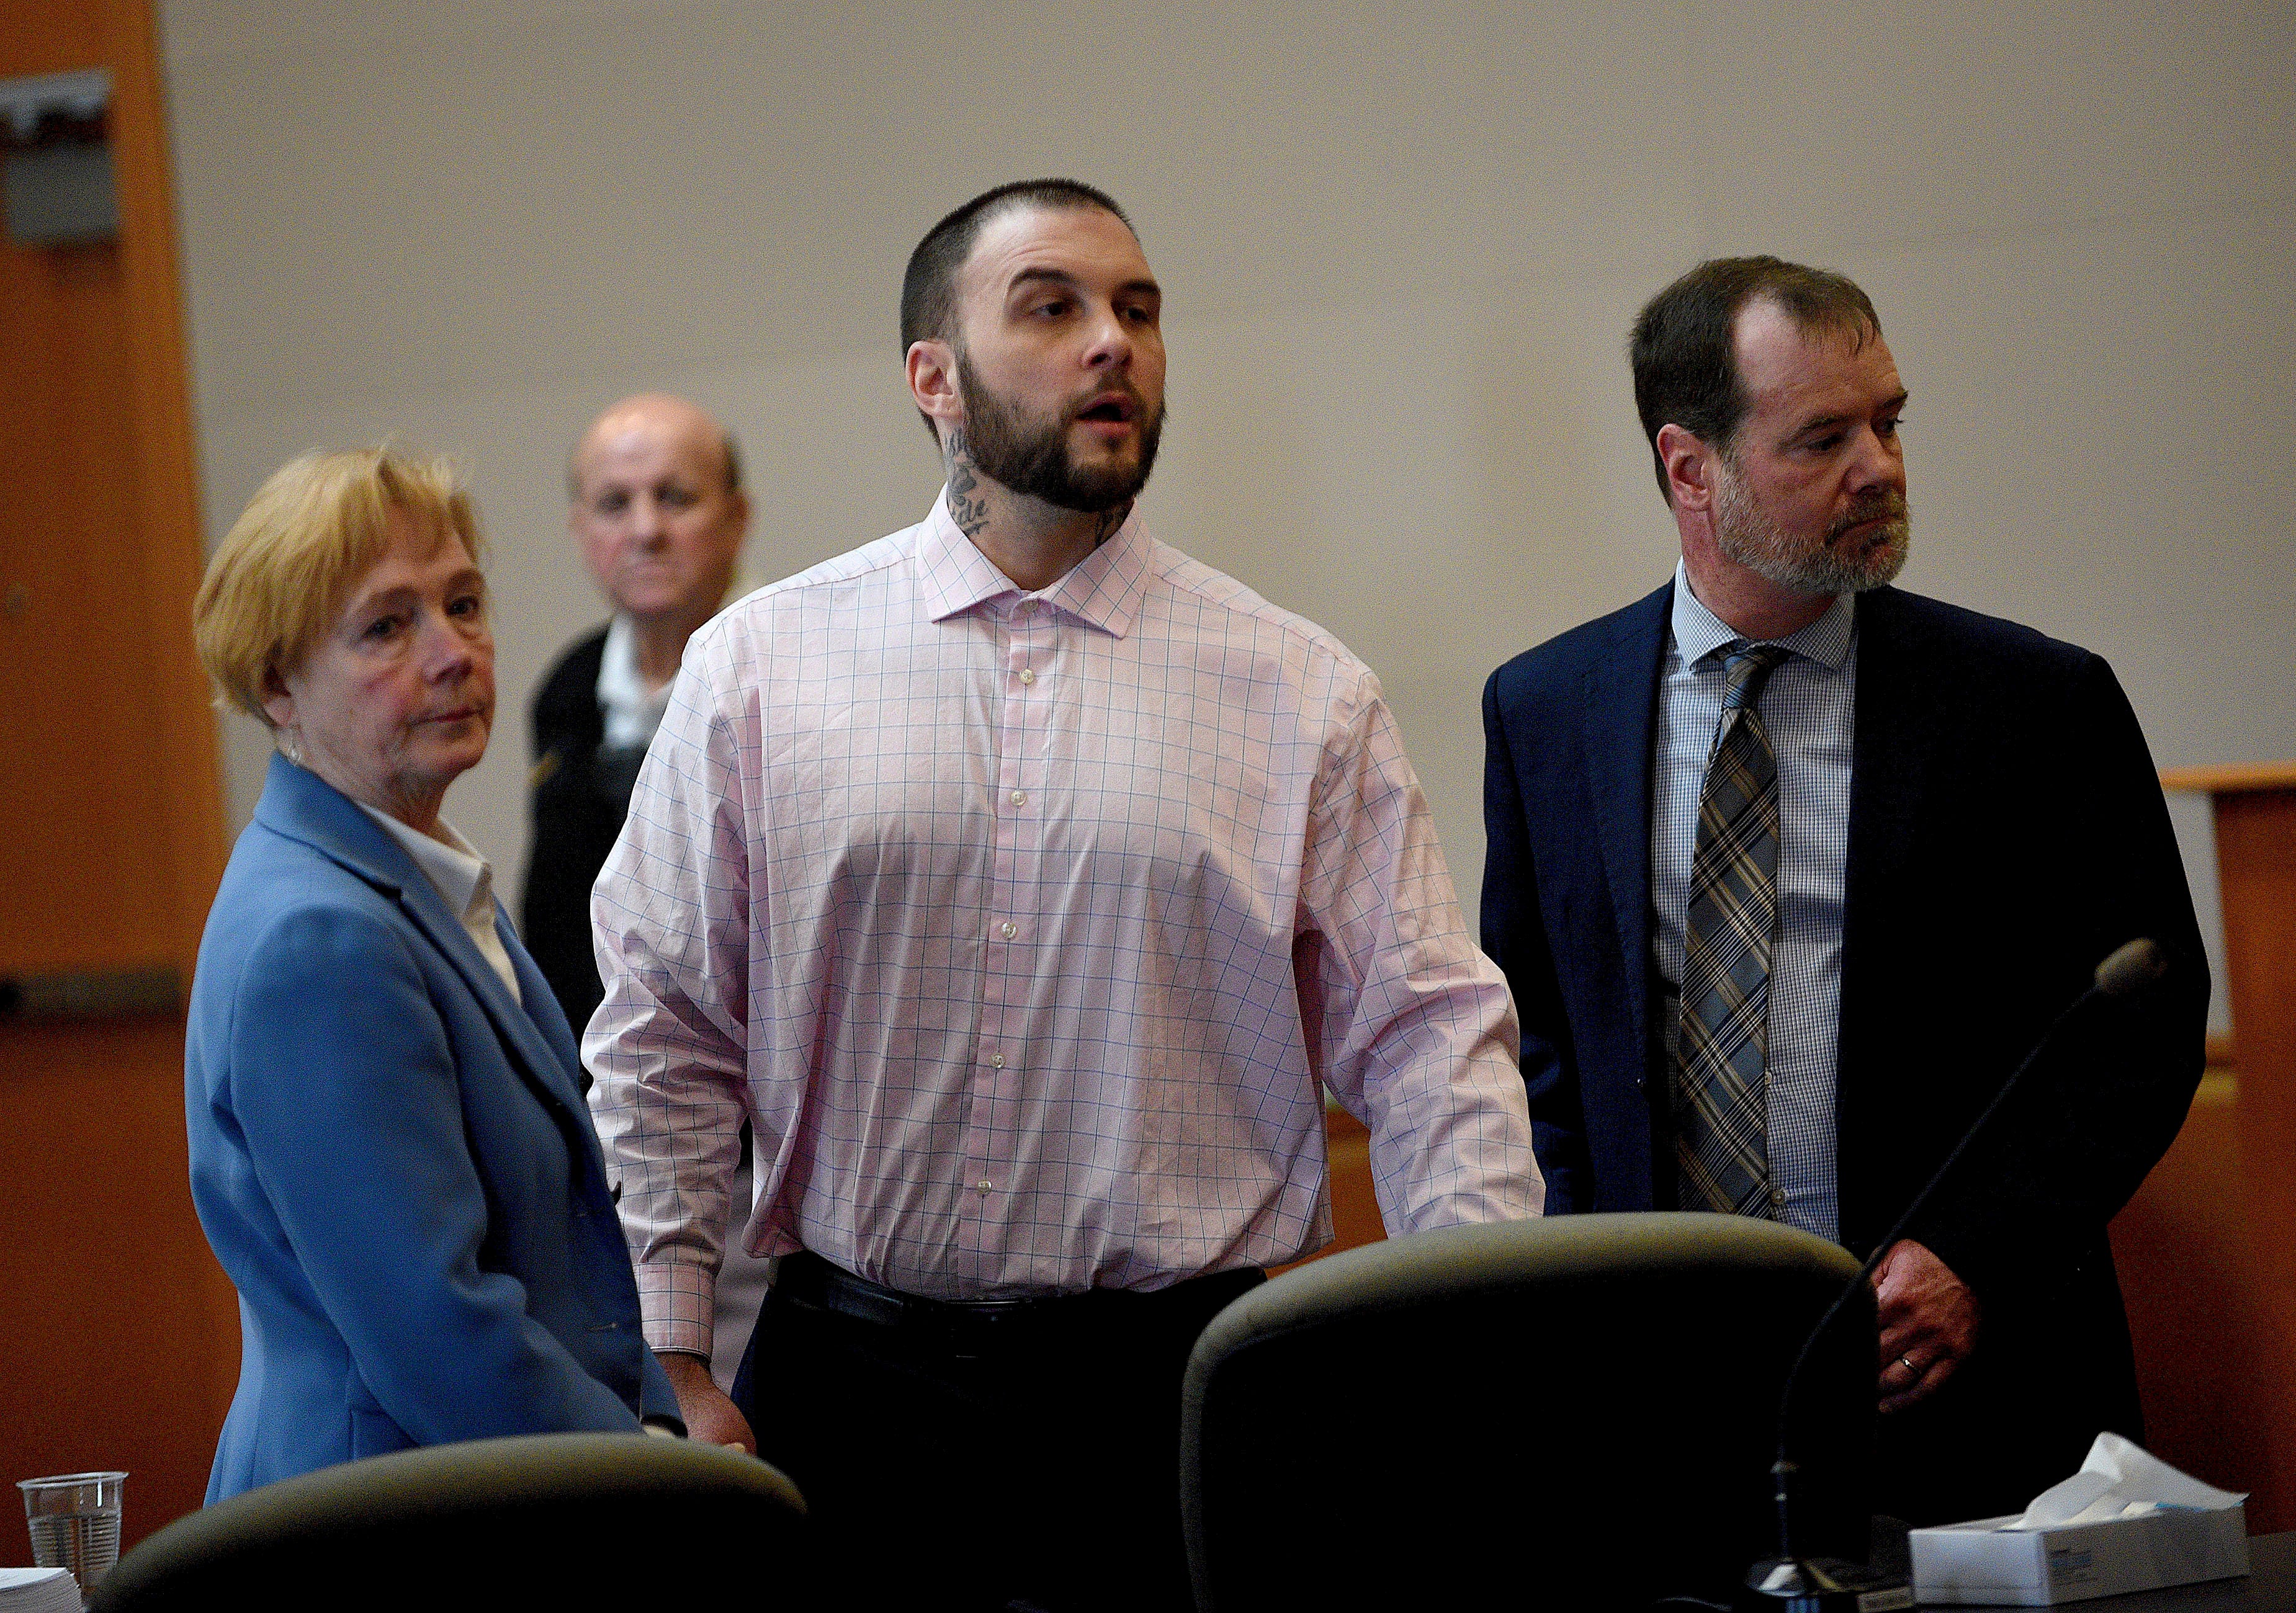 Adam Montgomery and his lawyers Caroline Smith and James Brooks watch as potential jurors enter the courtroom for jury selection ahead of his murder trial at Hillsborough County Superior Court in Manchester, New Hampshire, on Tuesday 6 February 2024